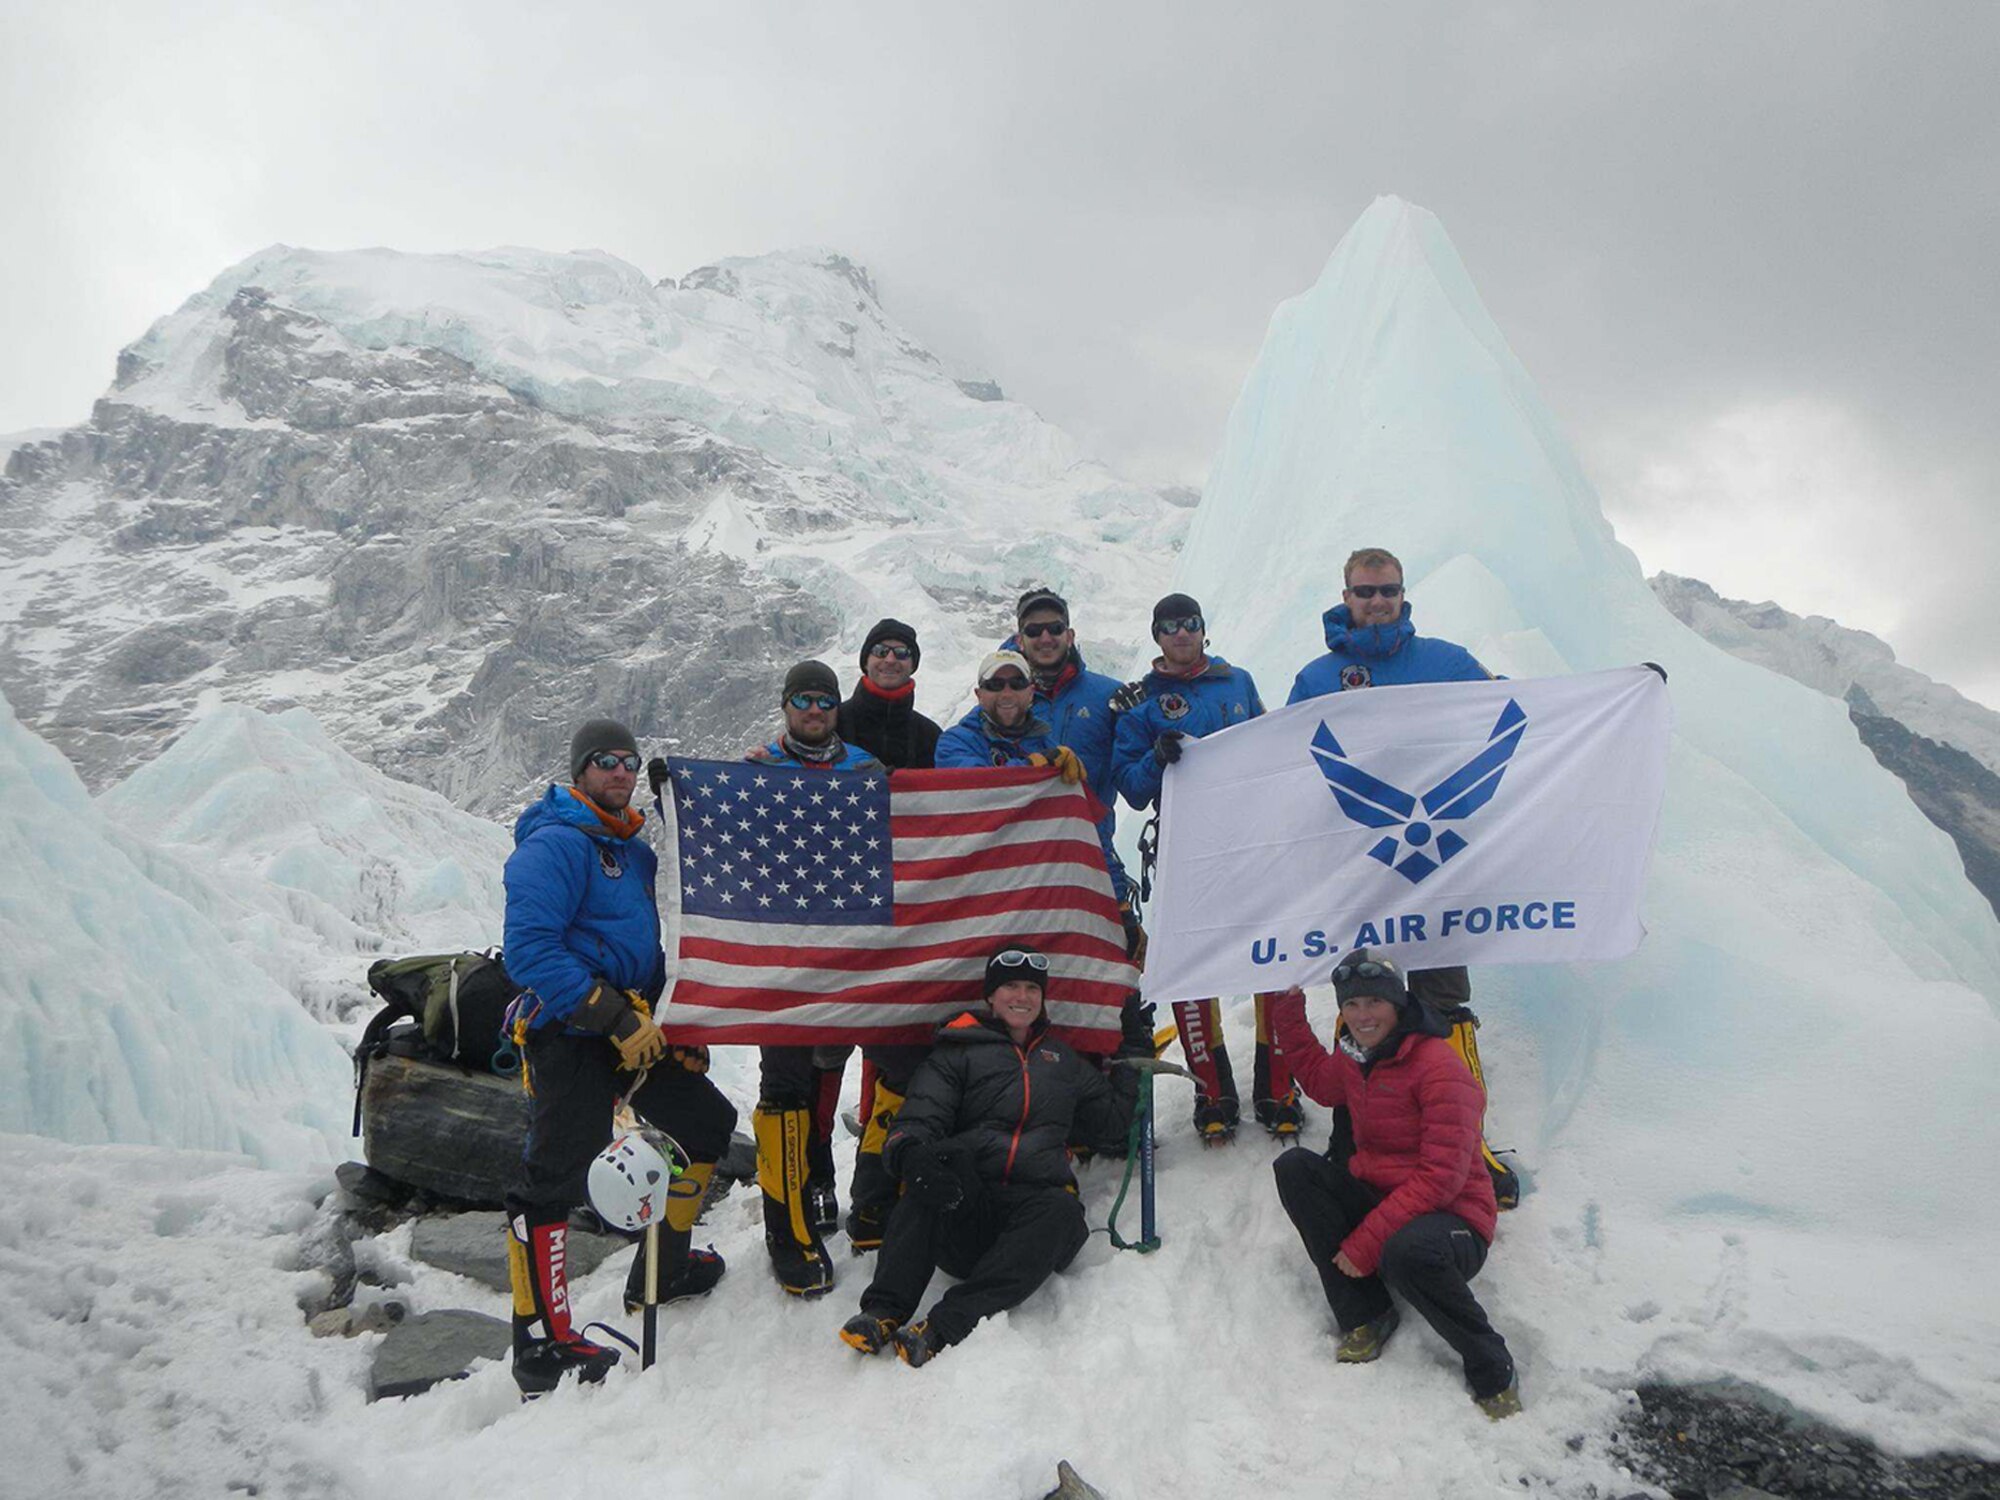 After practicing ice climbing techniques, members of the USAF 7 Summits Challenge team pose on the Khumbu Glacier at Everest Base Camp, Nepal (17,500ft). April 2013. (Courtesy photo)

From L-R: Capt Marshall Klitzke, SSgt Nick Gibson, Maj Malcolm Schongalla, Capt Megan Harkins, Maj Rob Marshall, Capt Kyle Martin, Capt Colin Merrin, Capt Heidi Kent, Capt Andrew Ackles.